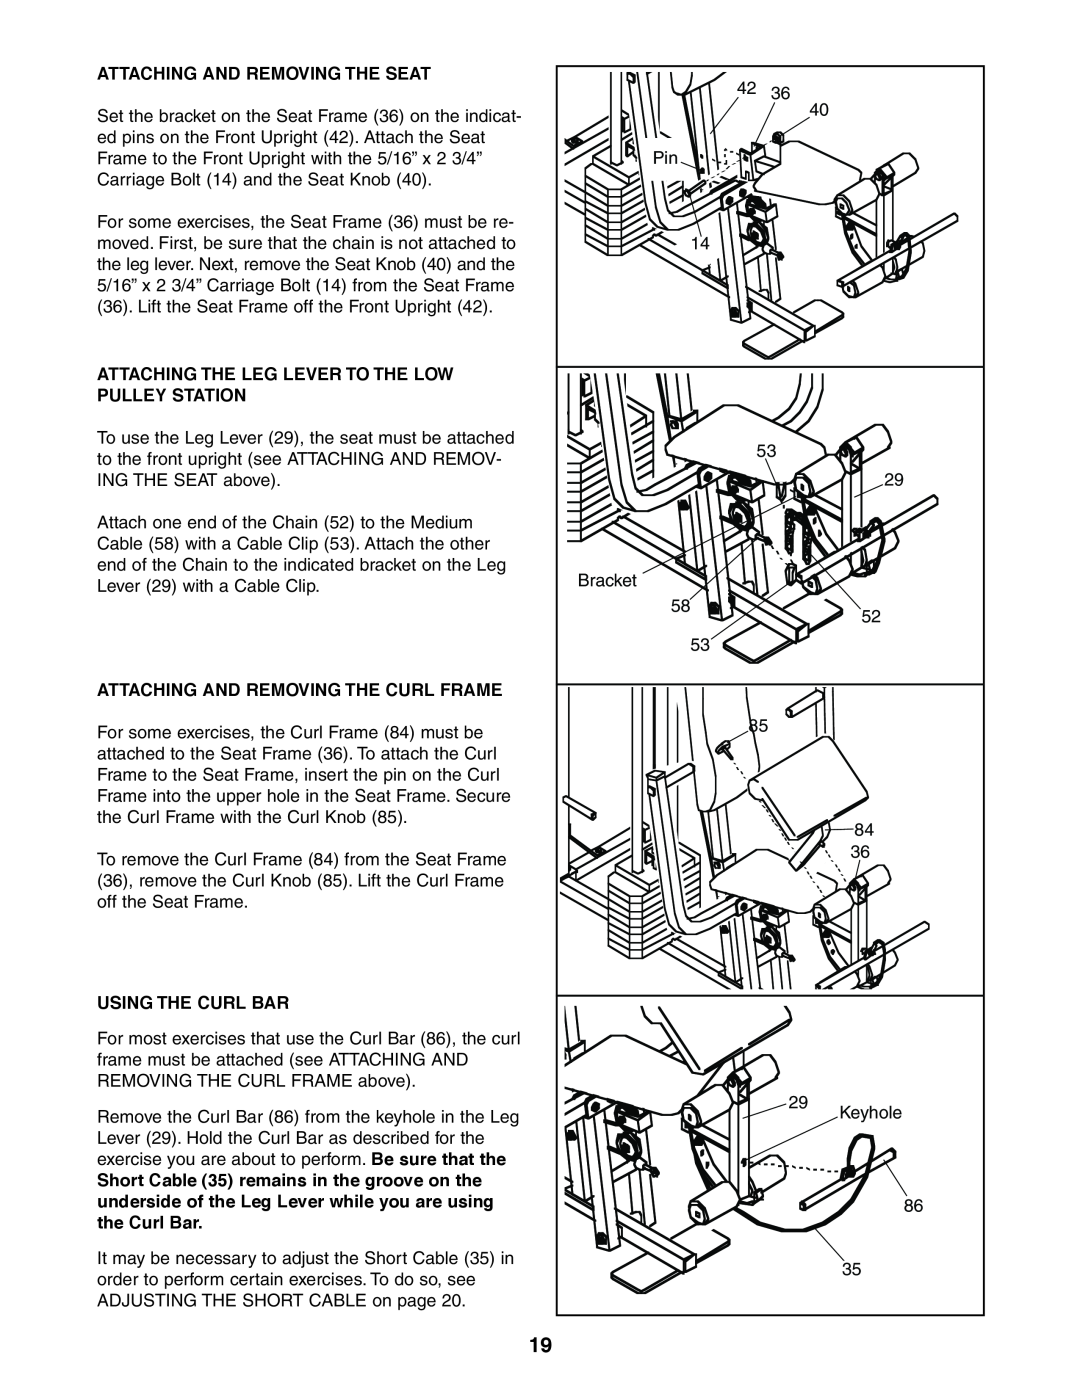 Sears 831.159460 Attaching And Removing The Seat, Attaching The Leg Lever To The Low Pulley Station, Using The Curl Bar 